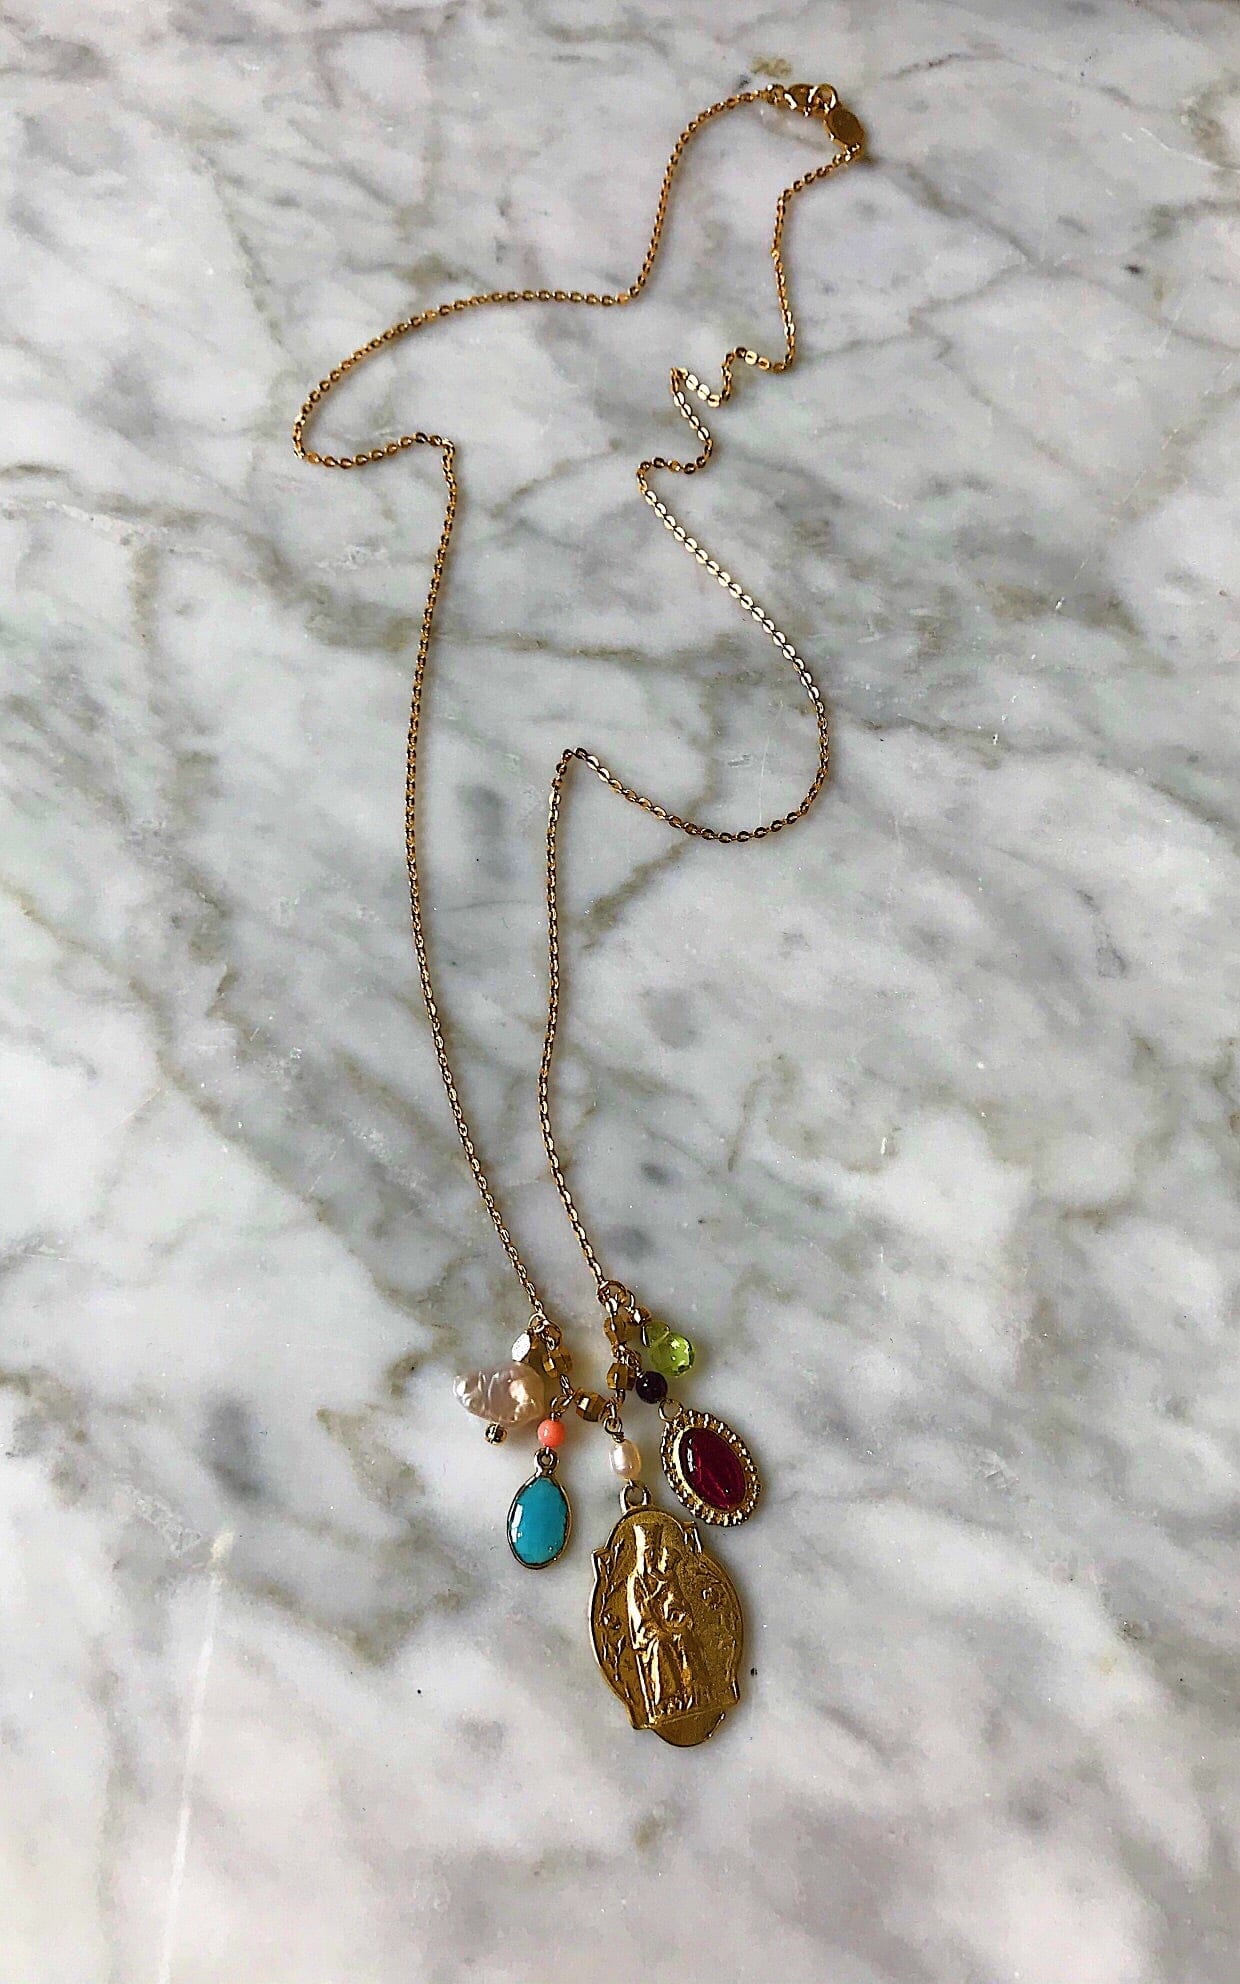  white  virgin mary  stunning  simple  silver  resin  red  pink  peridot  pearls  necklace  mother-of-pearl  medal  jewelry  jewellery  gold  glamorous  cute  coral  colliers  collier  chic  charm  brass  boho  blue  bijoux  beads  agate